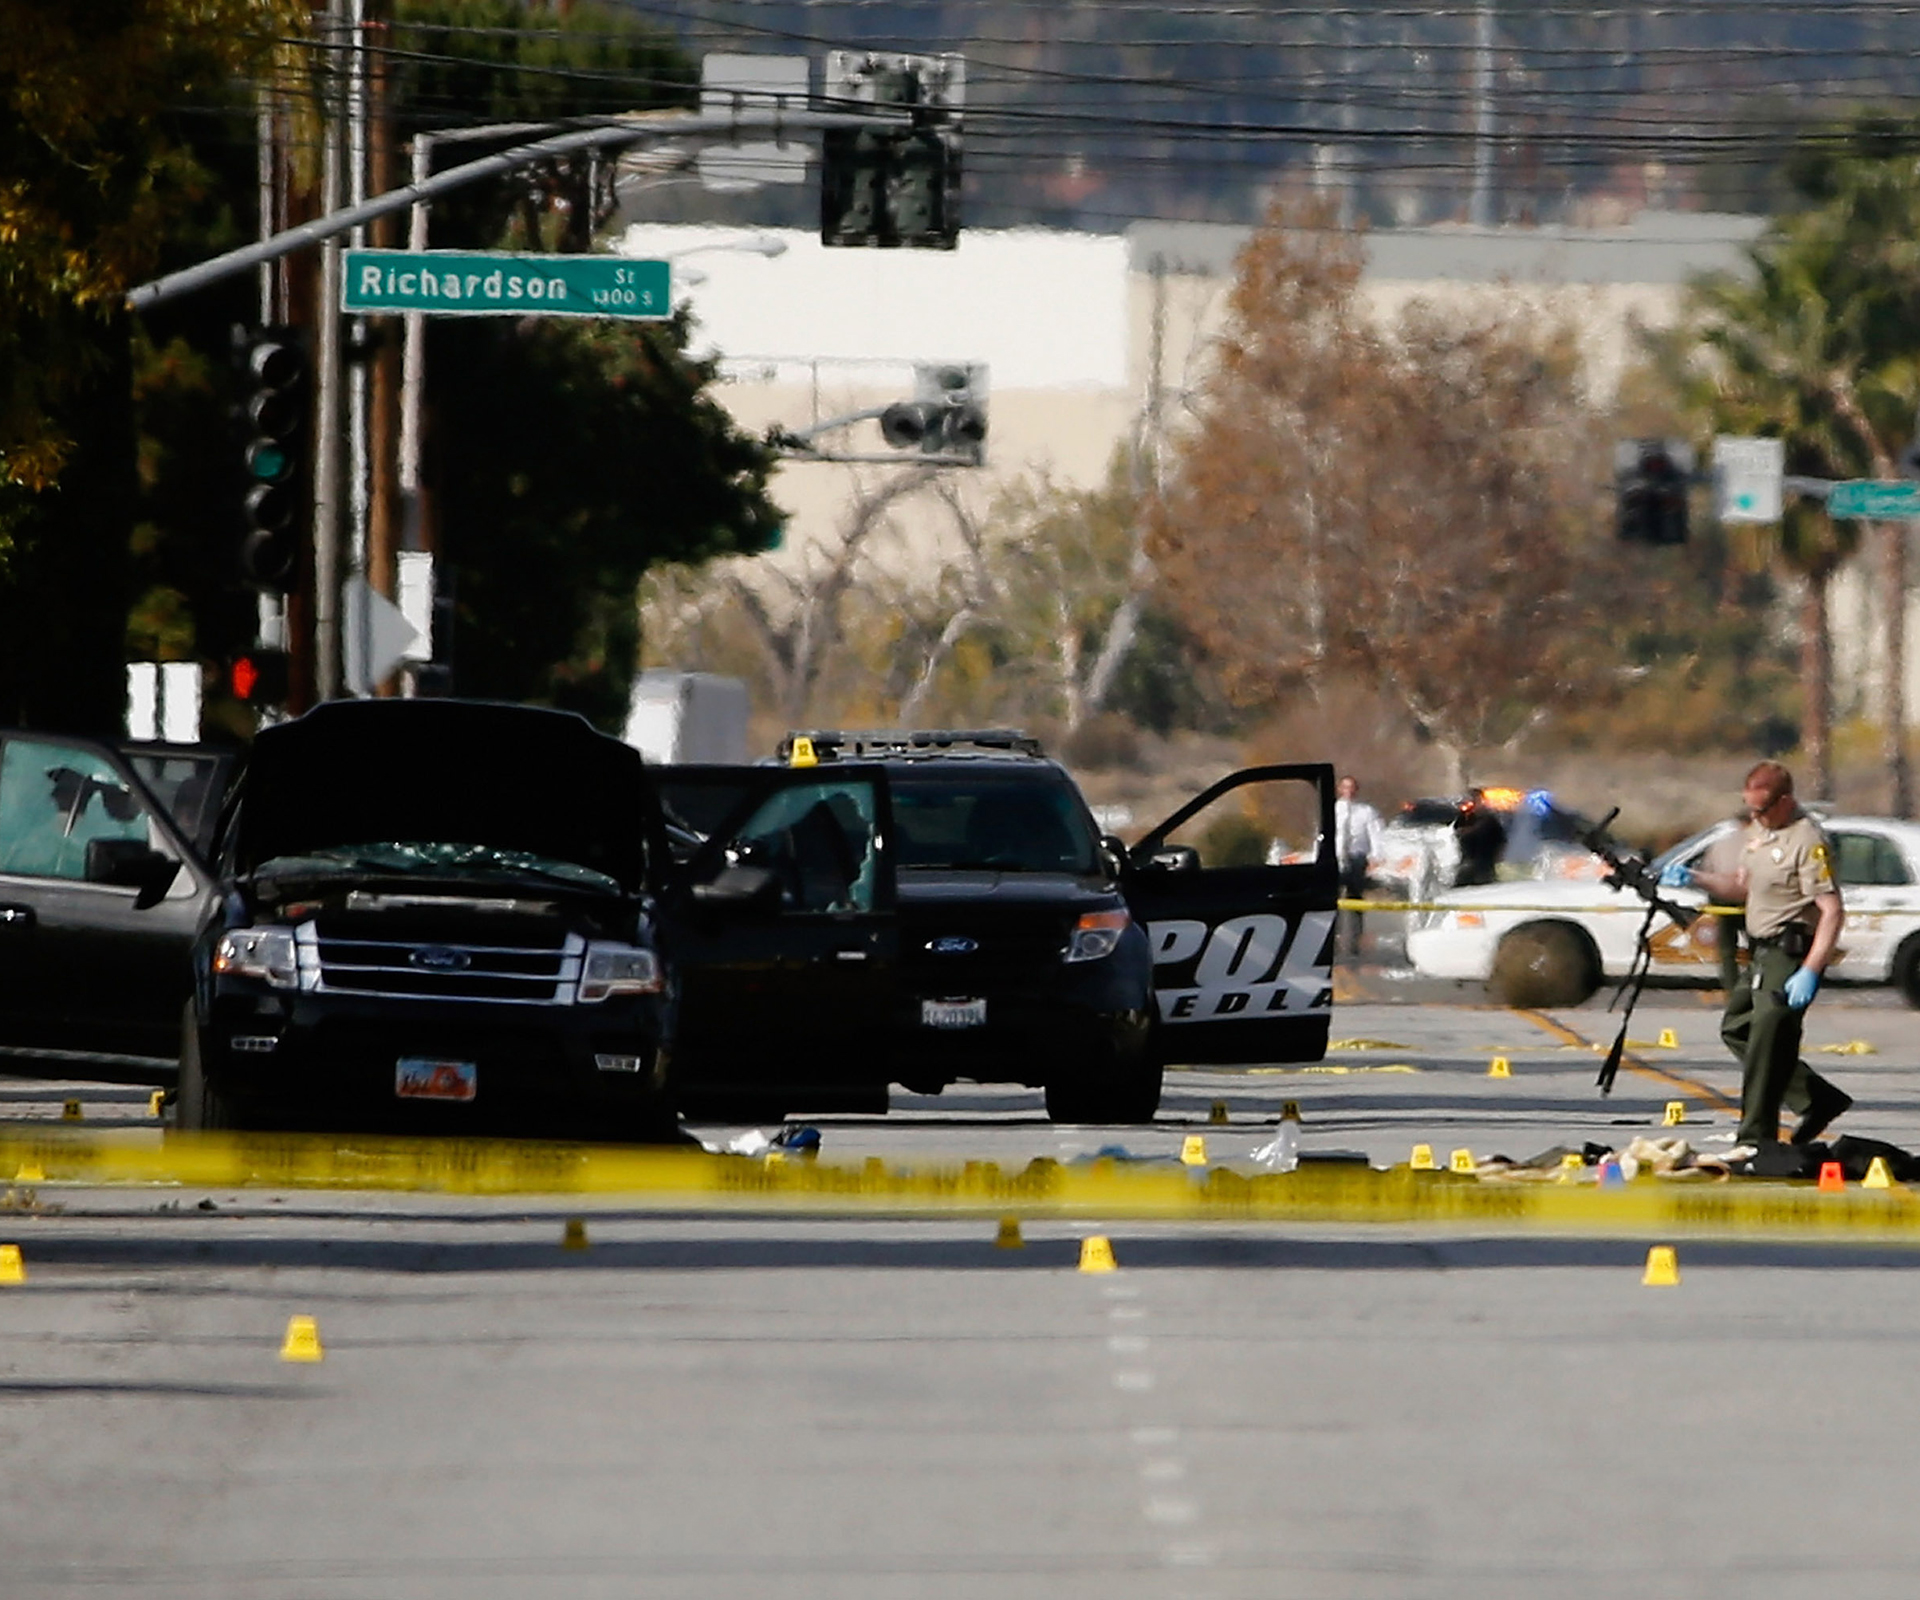 San Bernardino shooter became ‘radicalized’ after marrying for visa, reports say